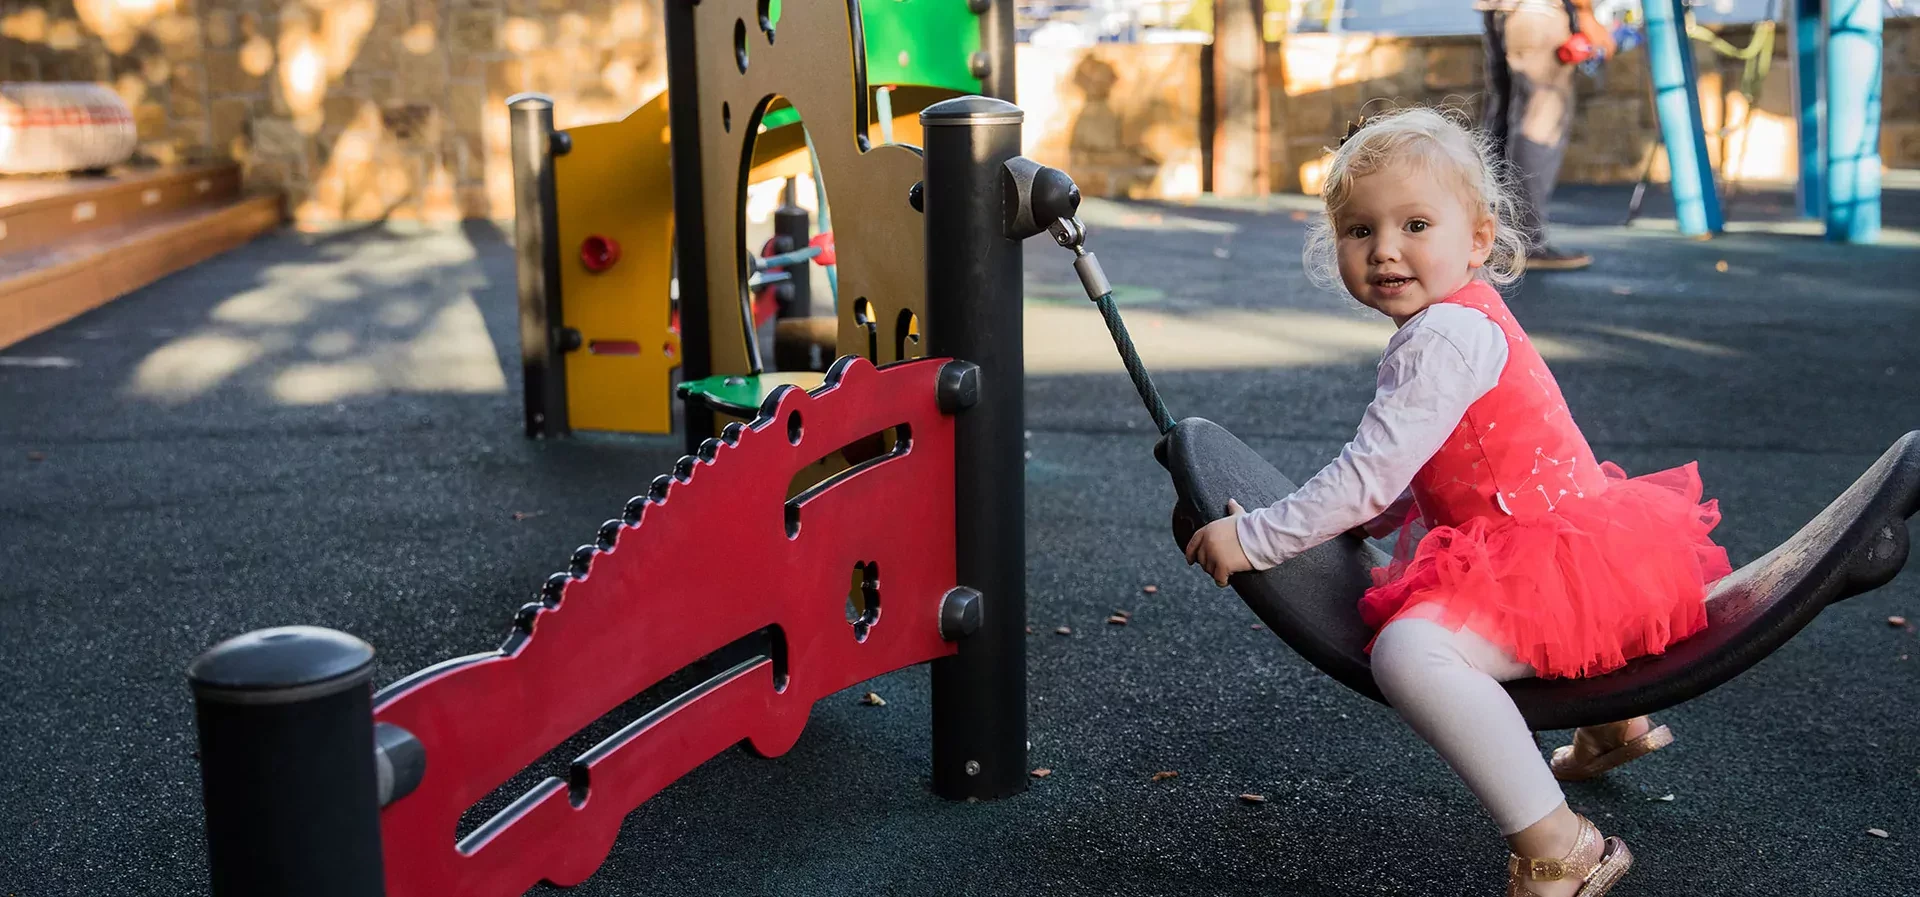 toddler playing on playground equipment for toddlers in a park